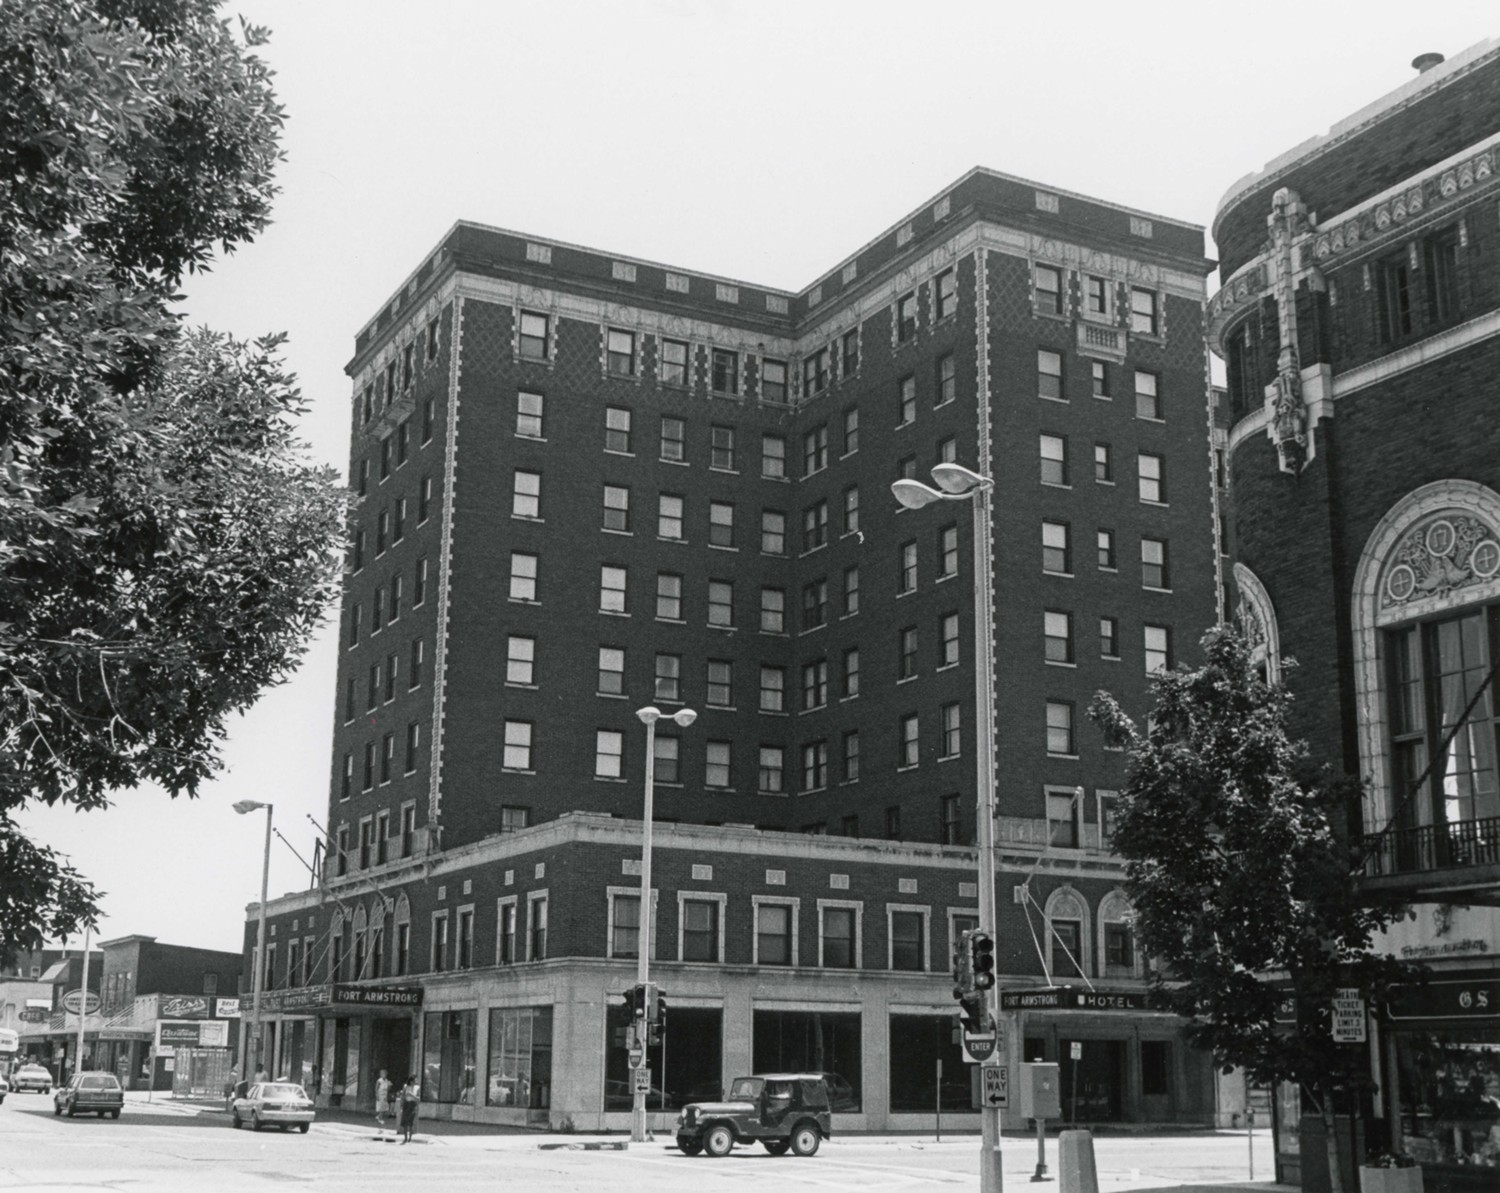 Fort Armstrong Hotel, Rock Island Illinois Hotel and dinner theater to right of hotel (1984)